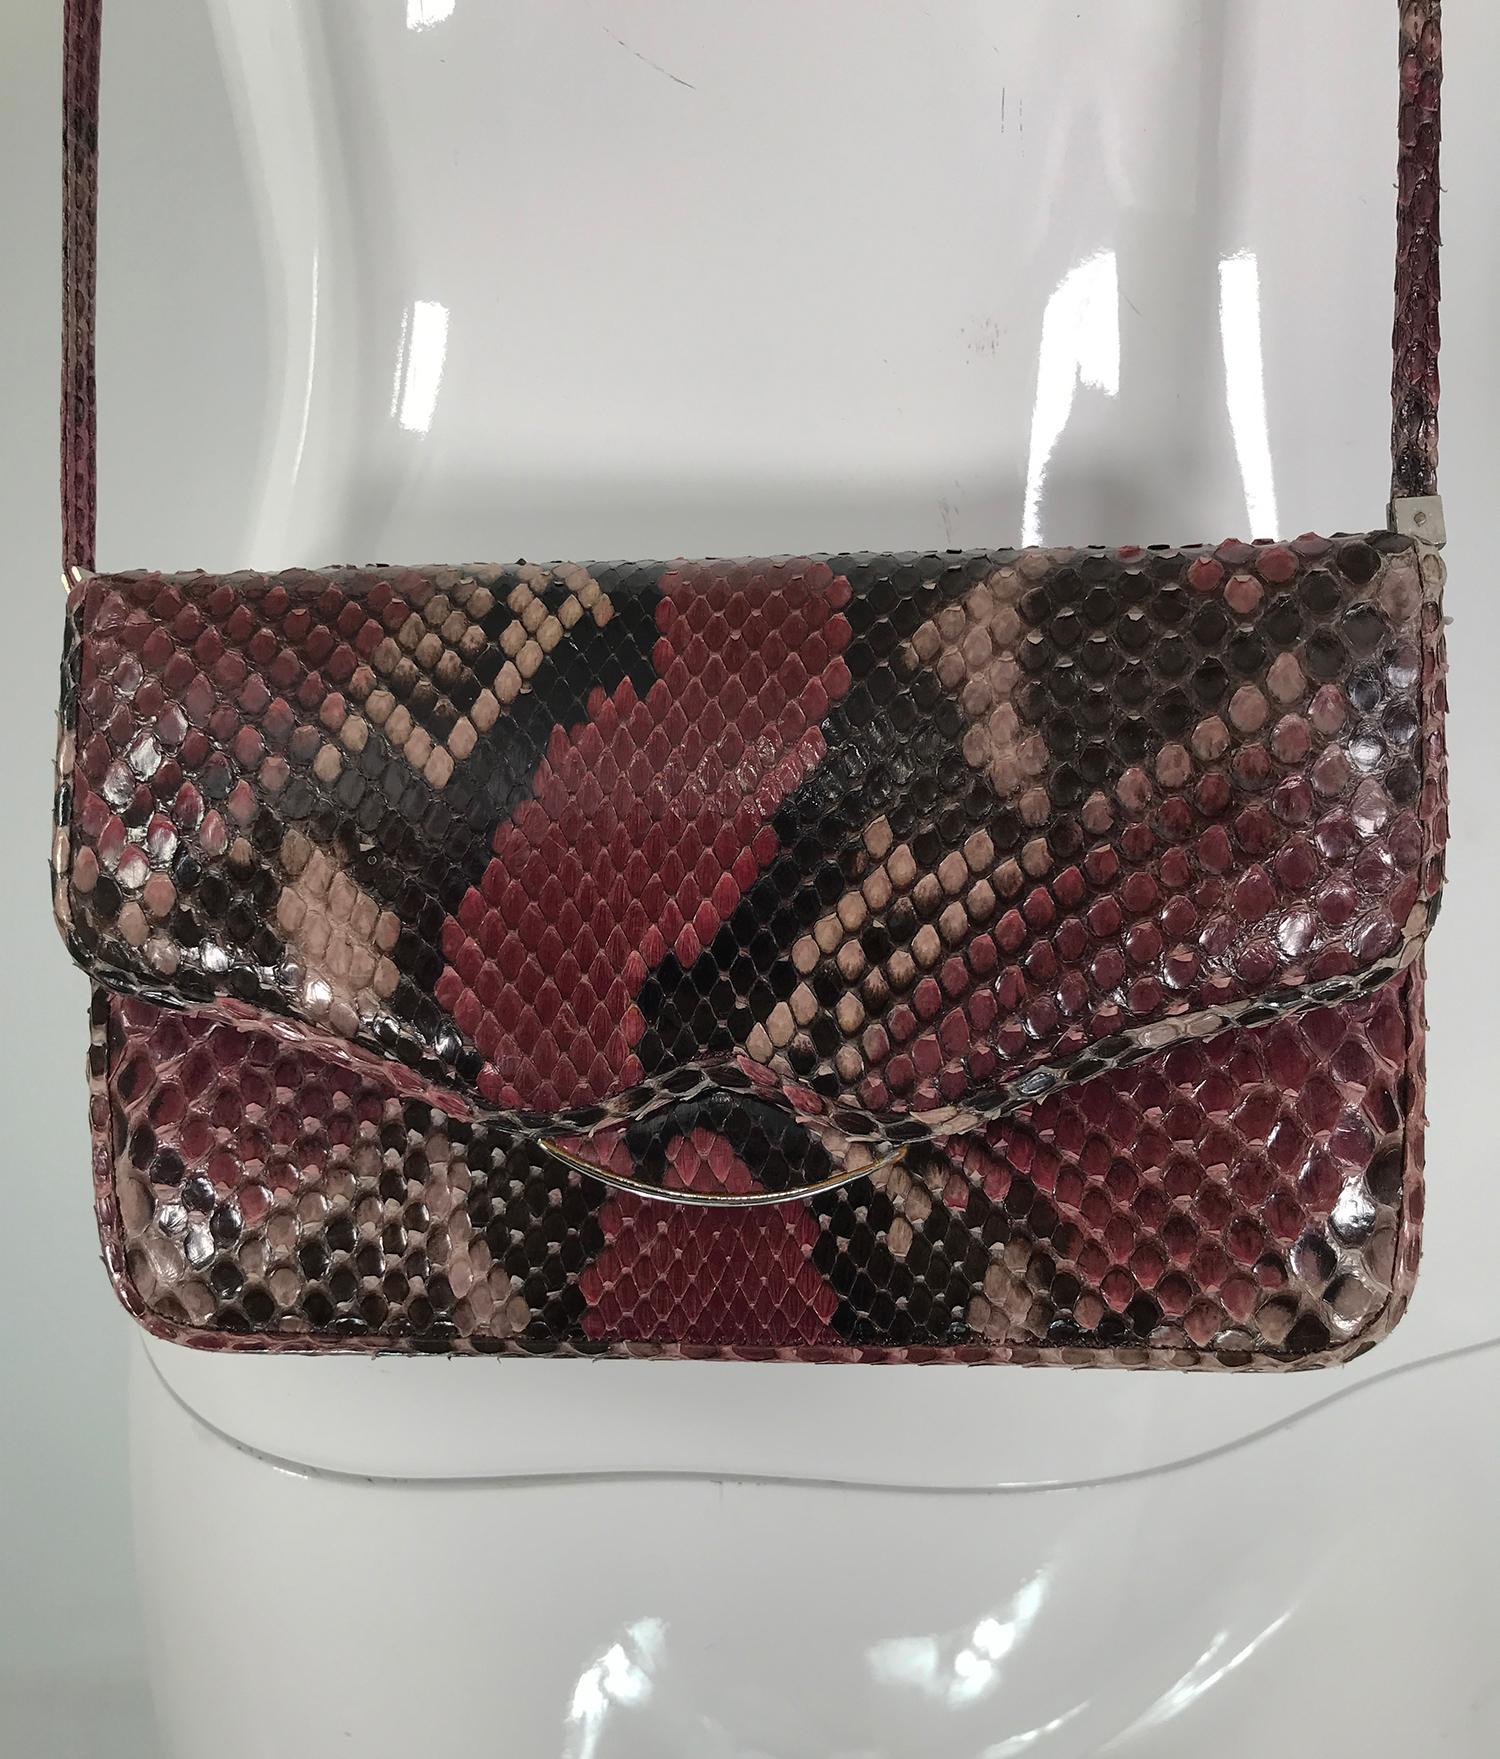 Judith Leiber wine & black snakeskin mini clutch or shoulder bag with silver hardware. Flap front bag with silver metal band at flap. Perfect for cocktails or any special occasion. Lined in wine satin, there is a single slip compartment and a single